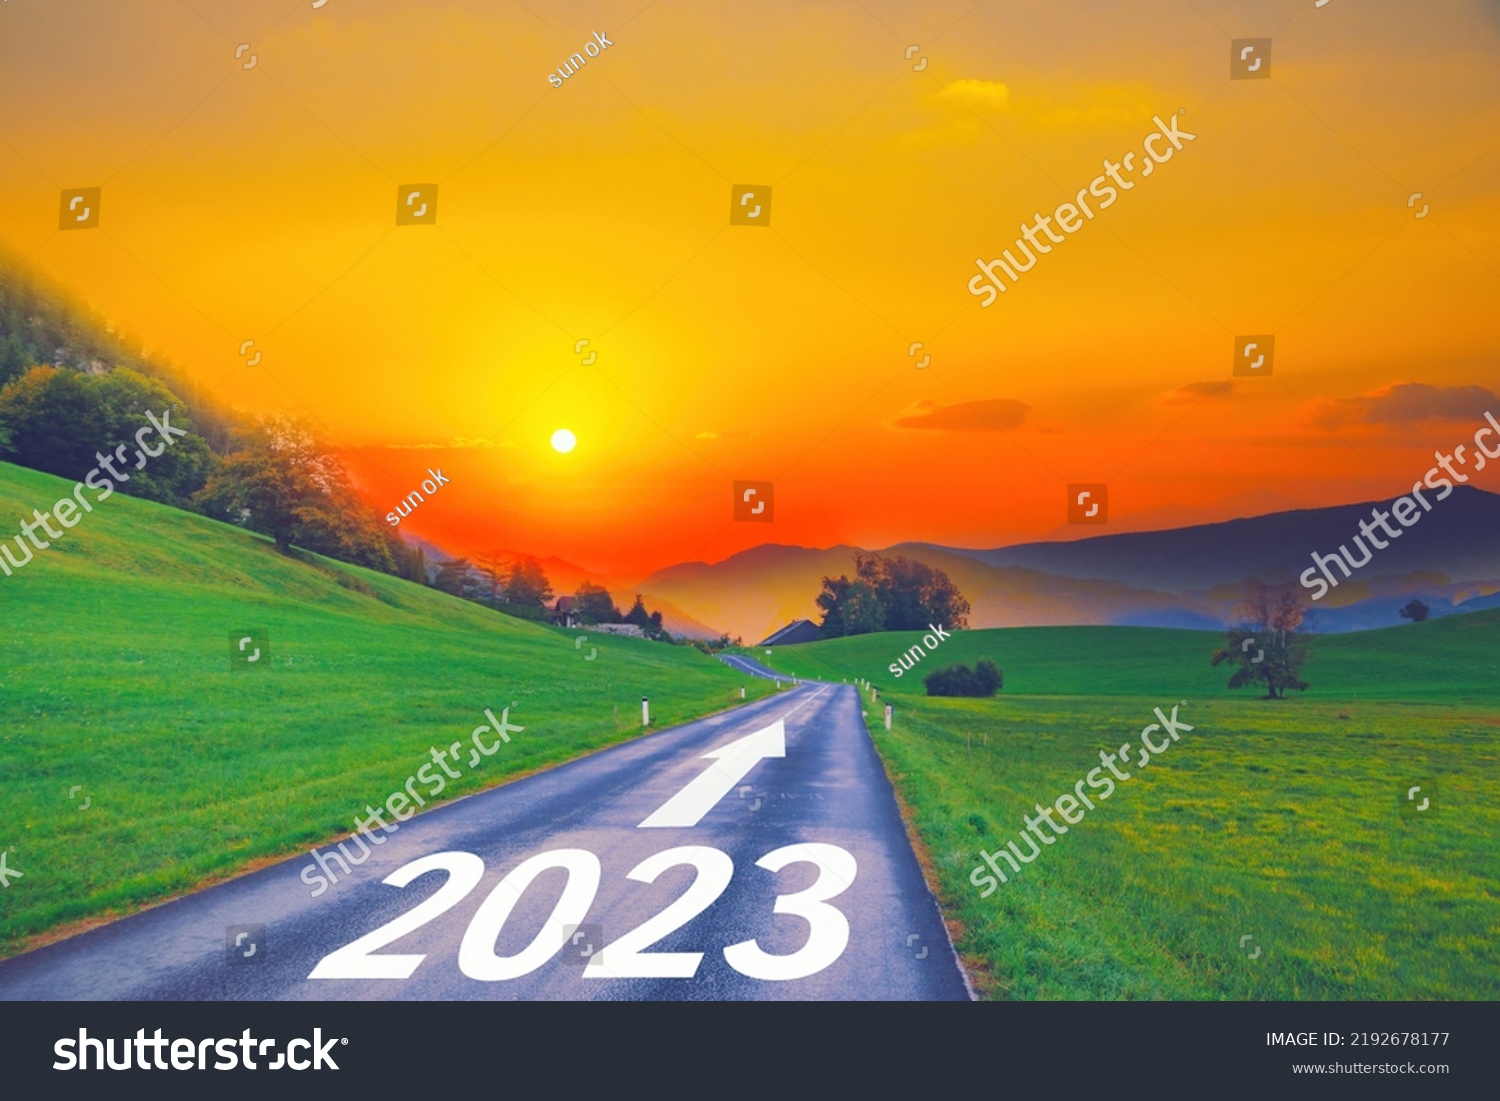 Open empty road path end and new year 2023. Upcoming 2023 goals and leaving behind 2022 year. passing time future, life plan change, work start run line, sunset hope growth begin, go forward concept. #2192678177